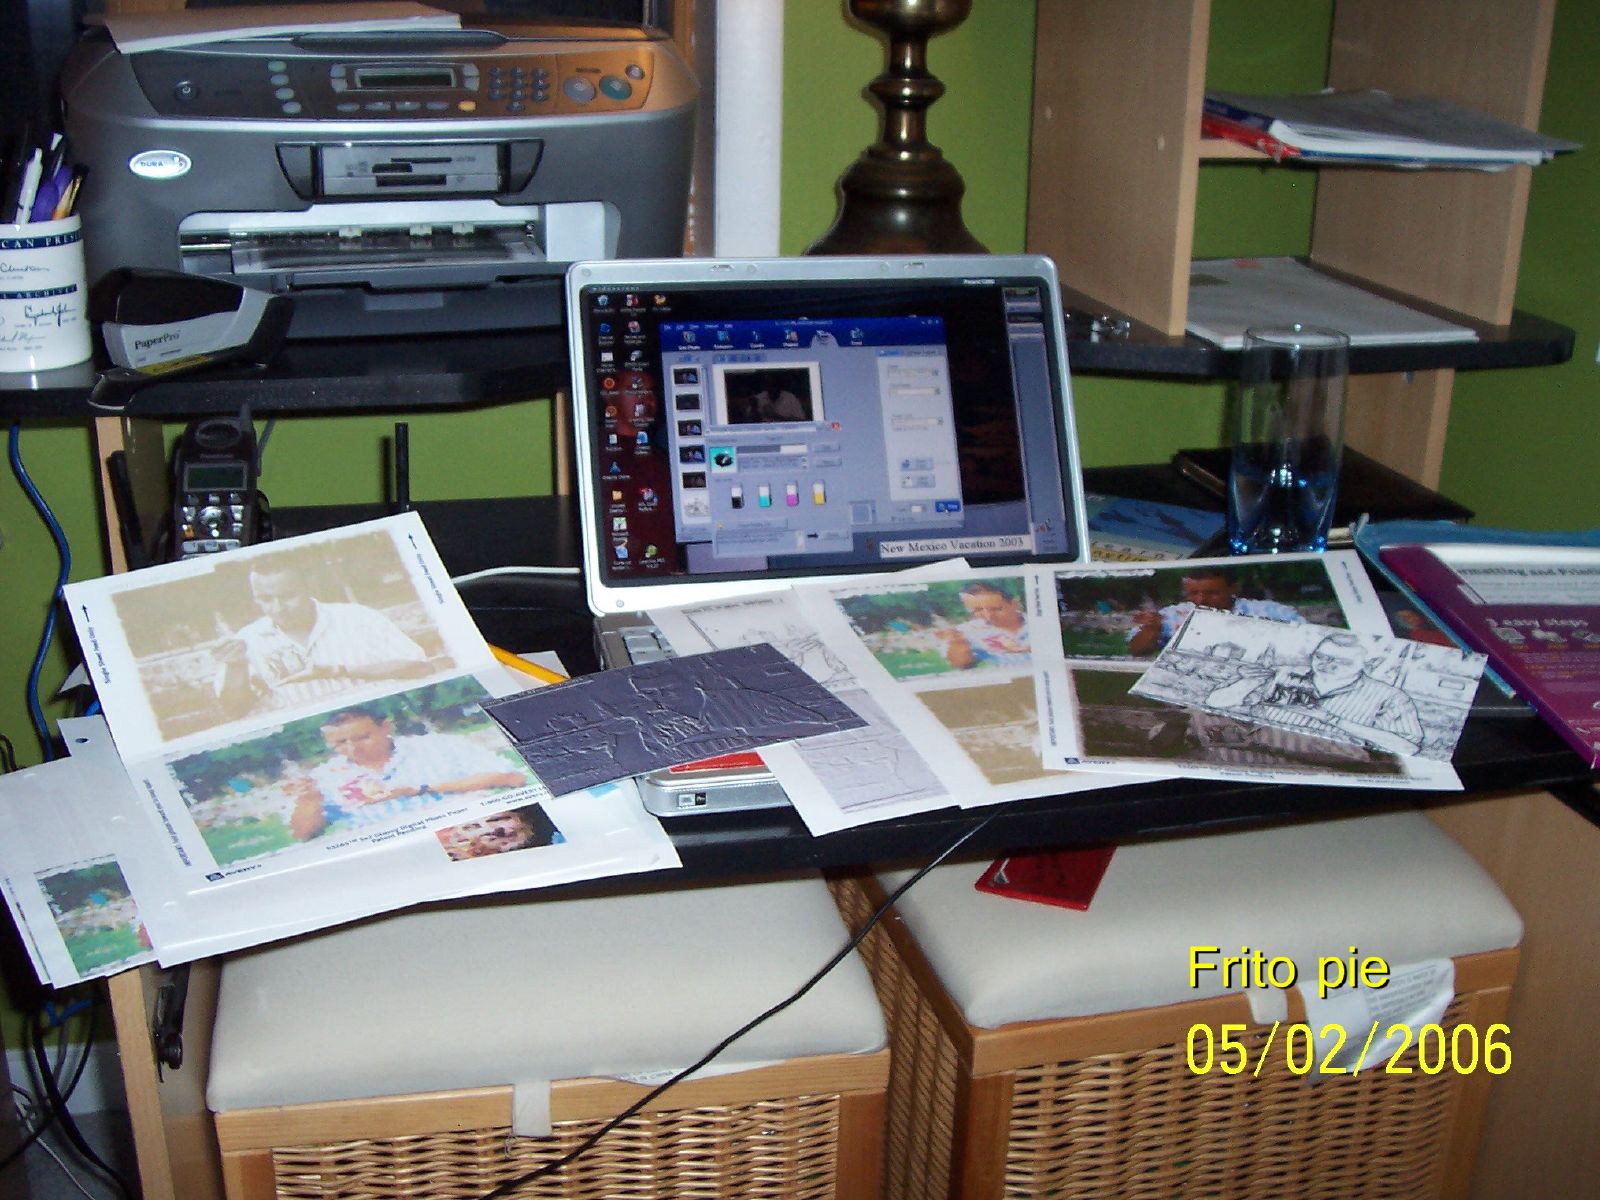 the laptop and various papers on the table are piled up